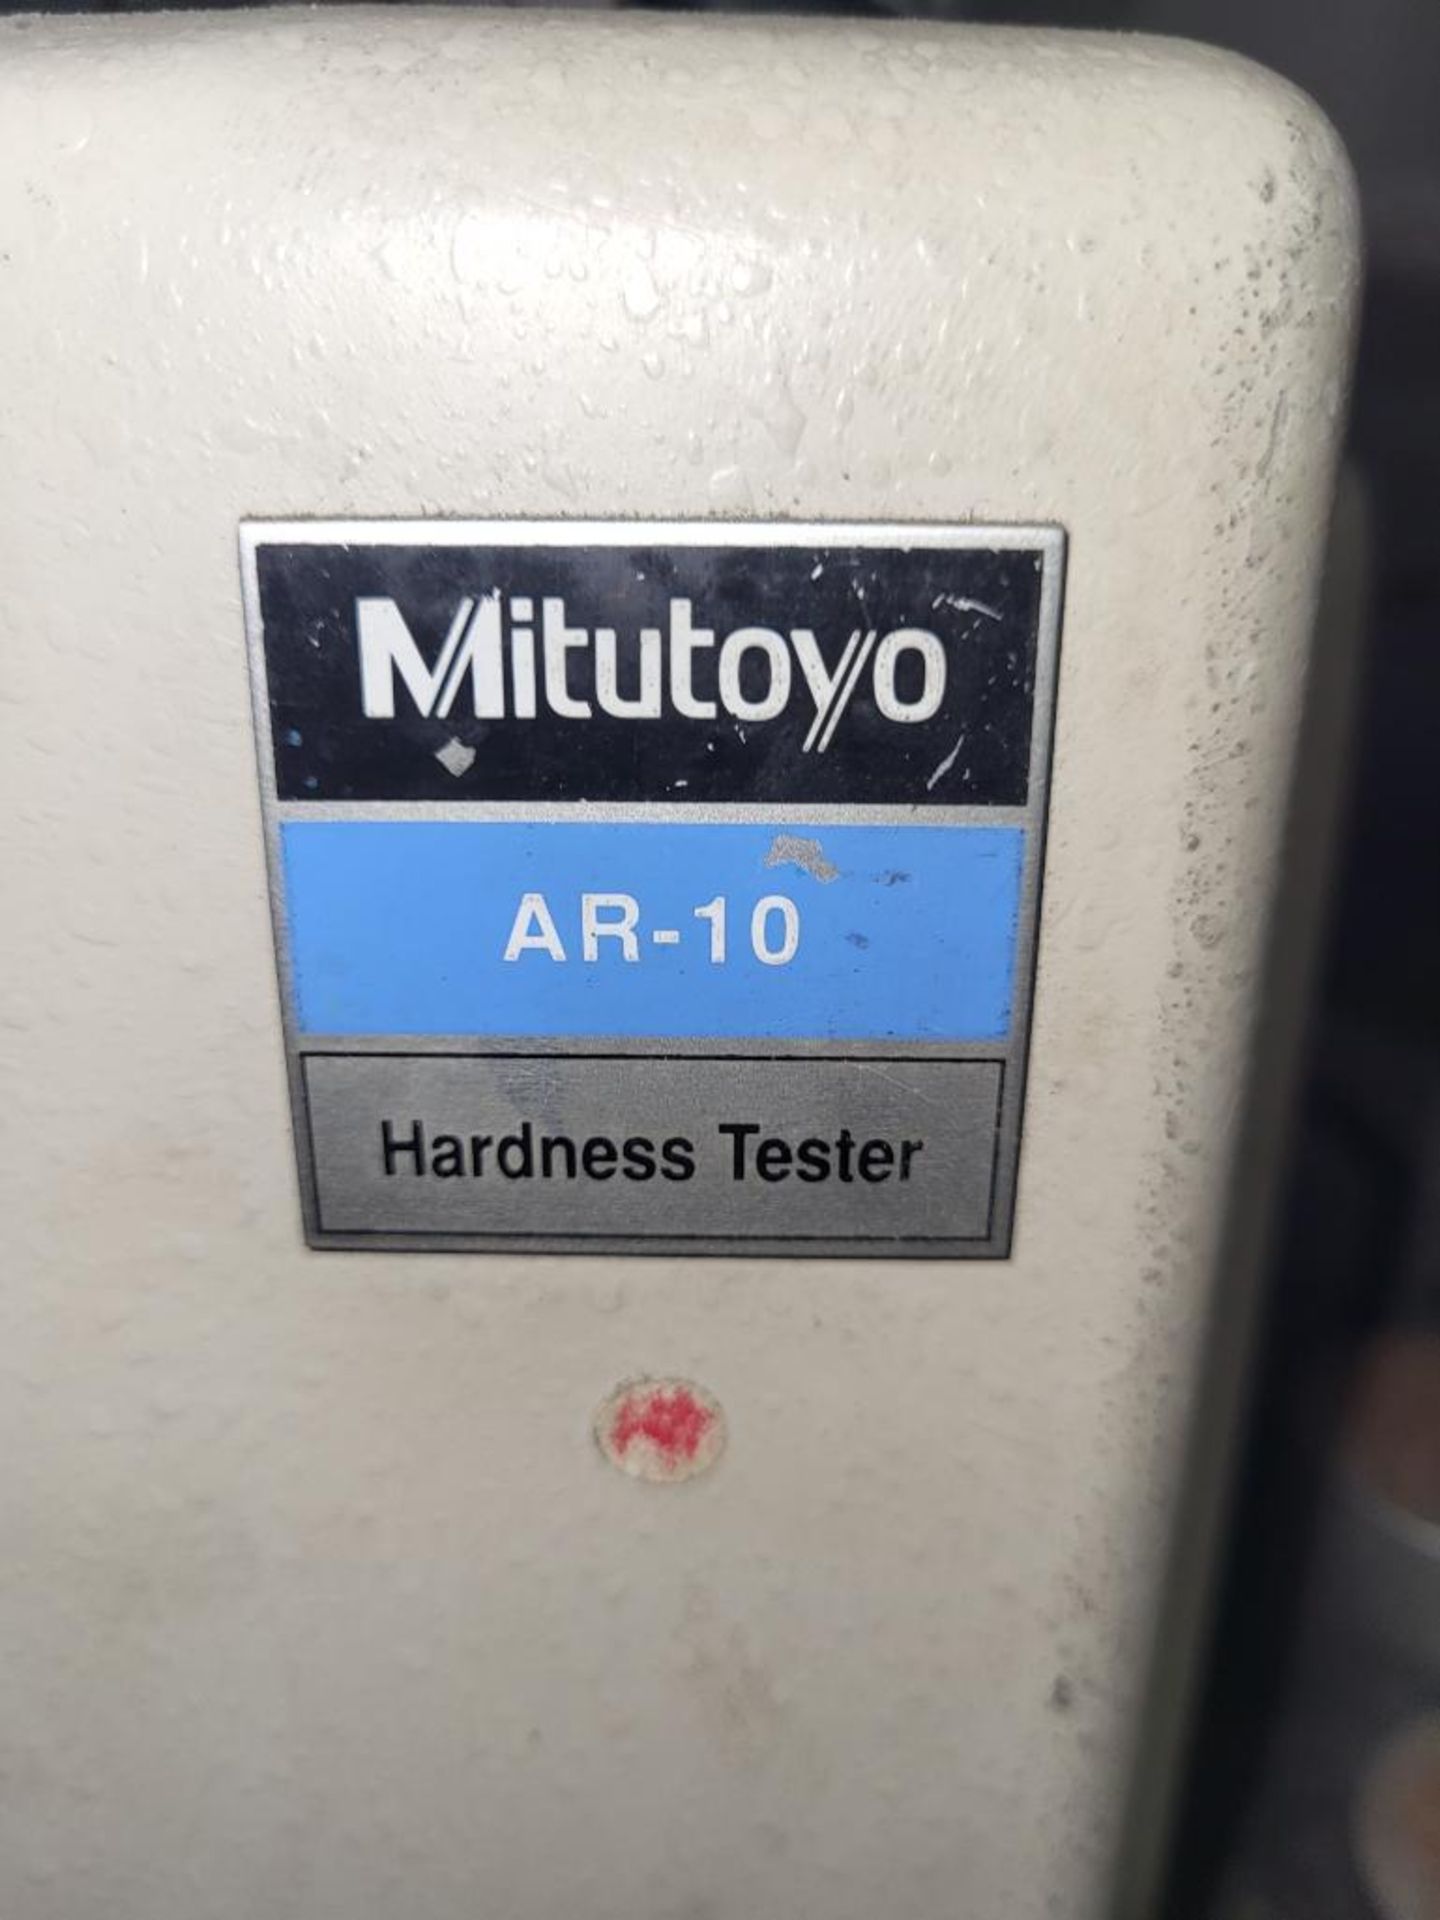 Electric Mitutoyo AR-10 Hardness Tester - Image 2 of 3